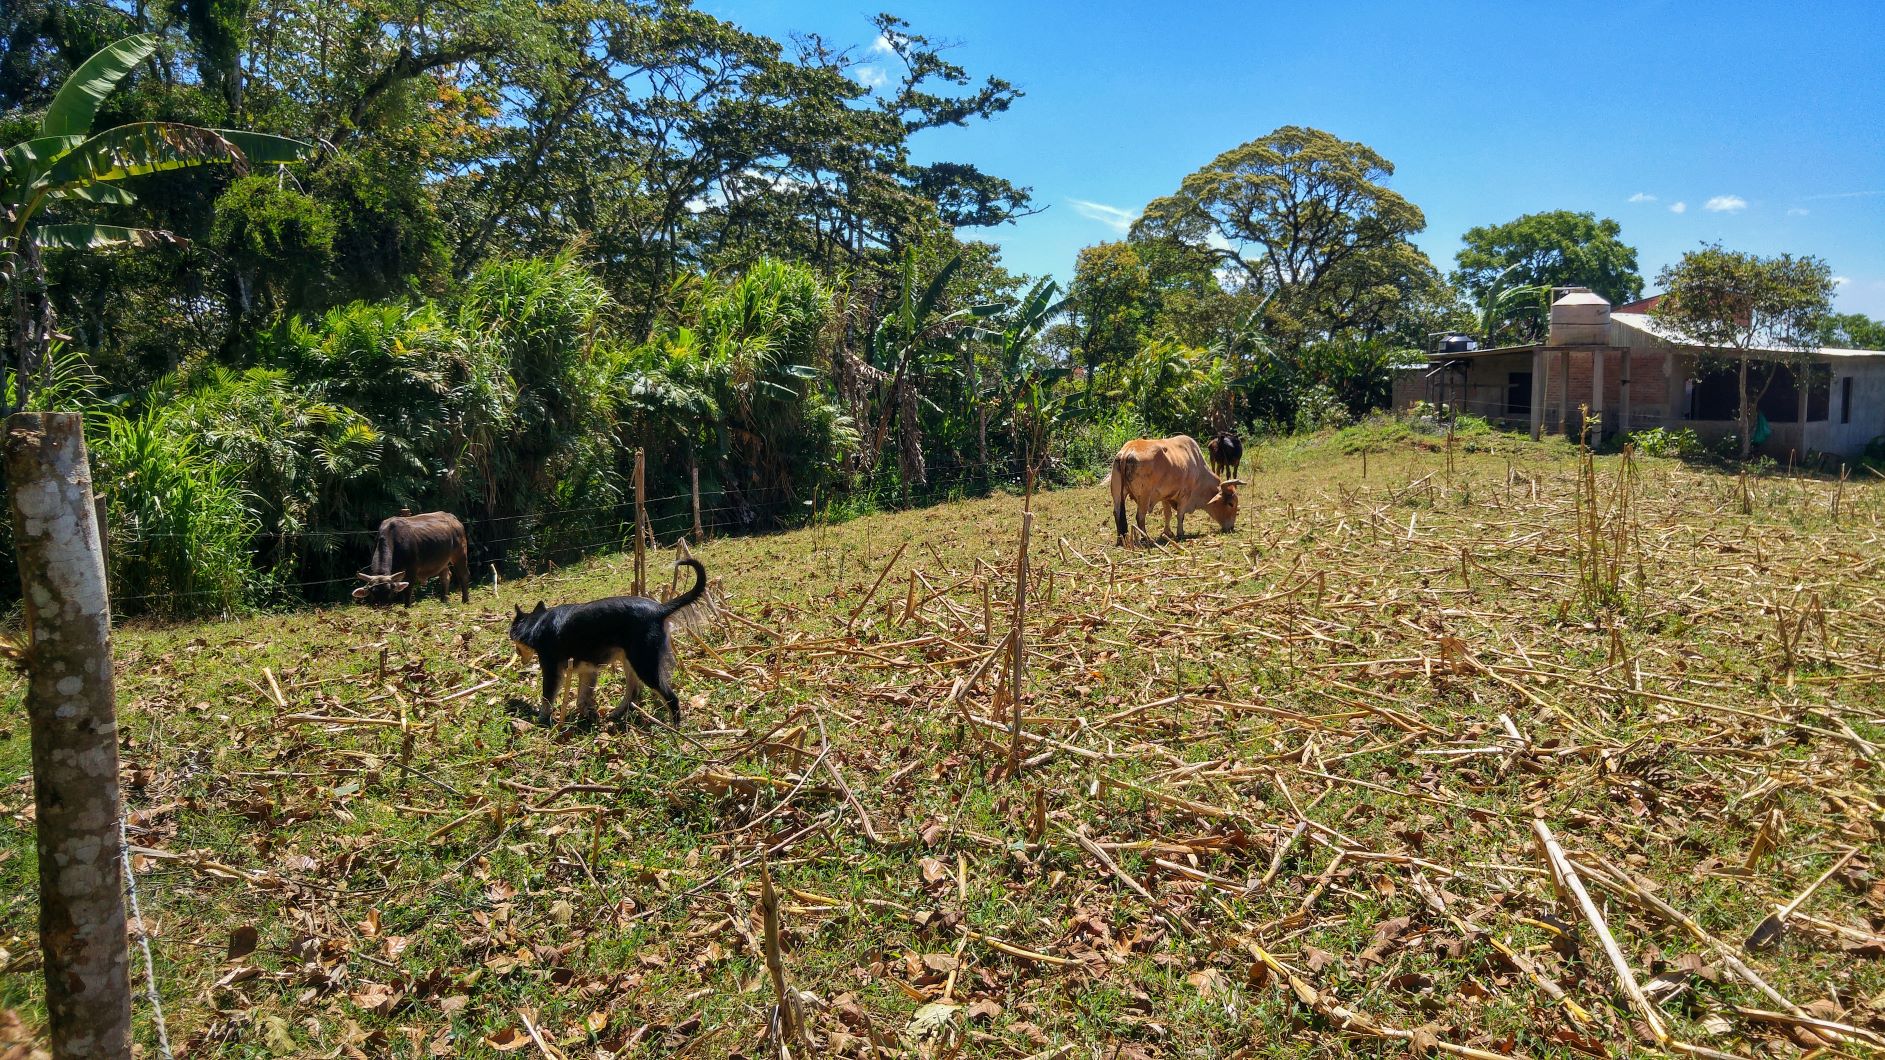 Dog and cows in Nicaragua